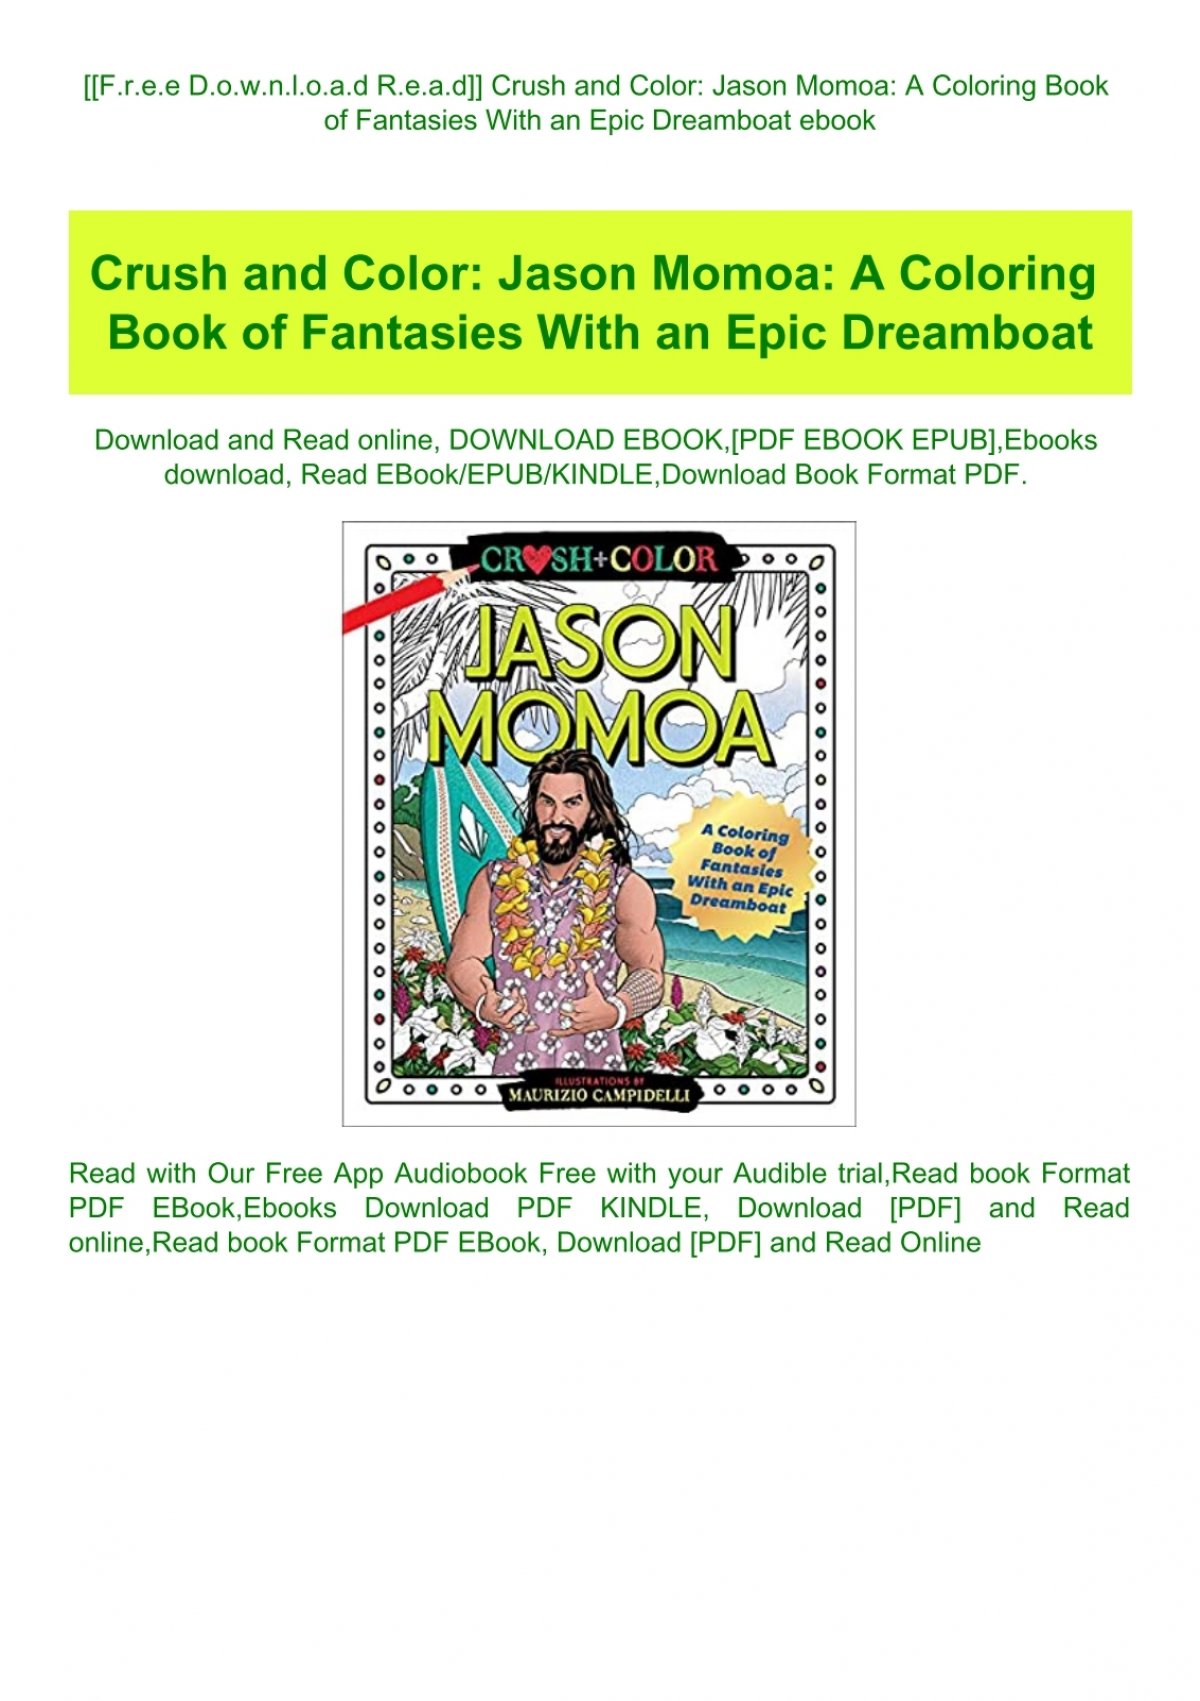 Download F R E E D O W N L O A D R E A D Crush And Color Jason Momoa A Coloring Book Of Fantasies With An Epic Dreamboat Ebook